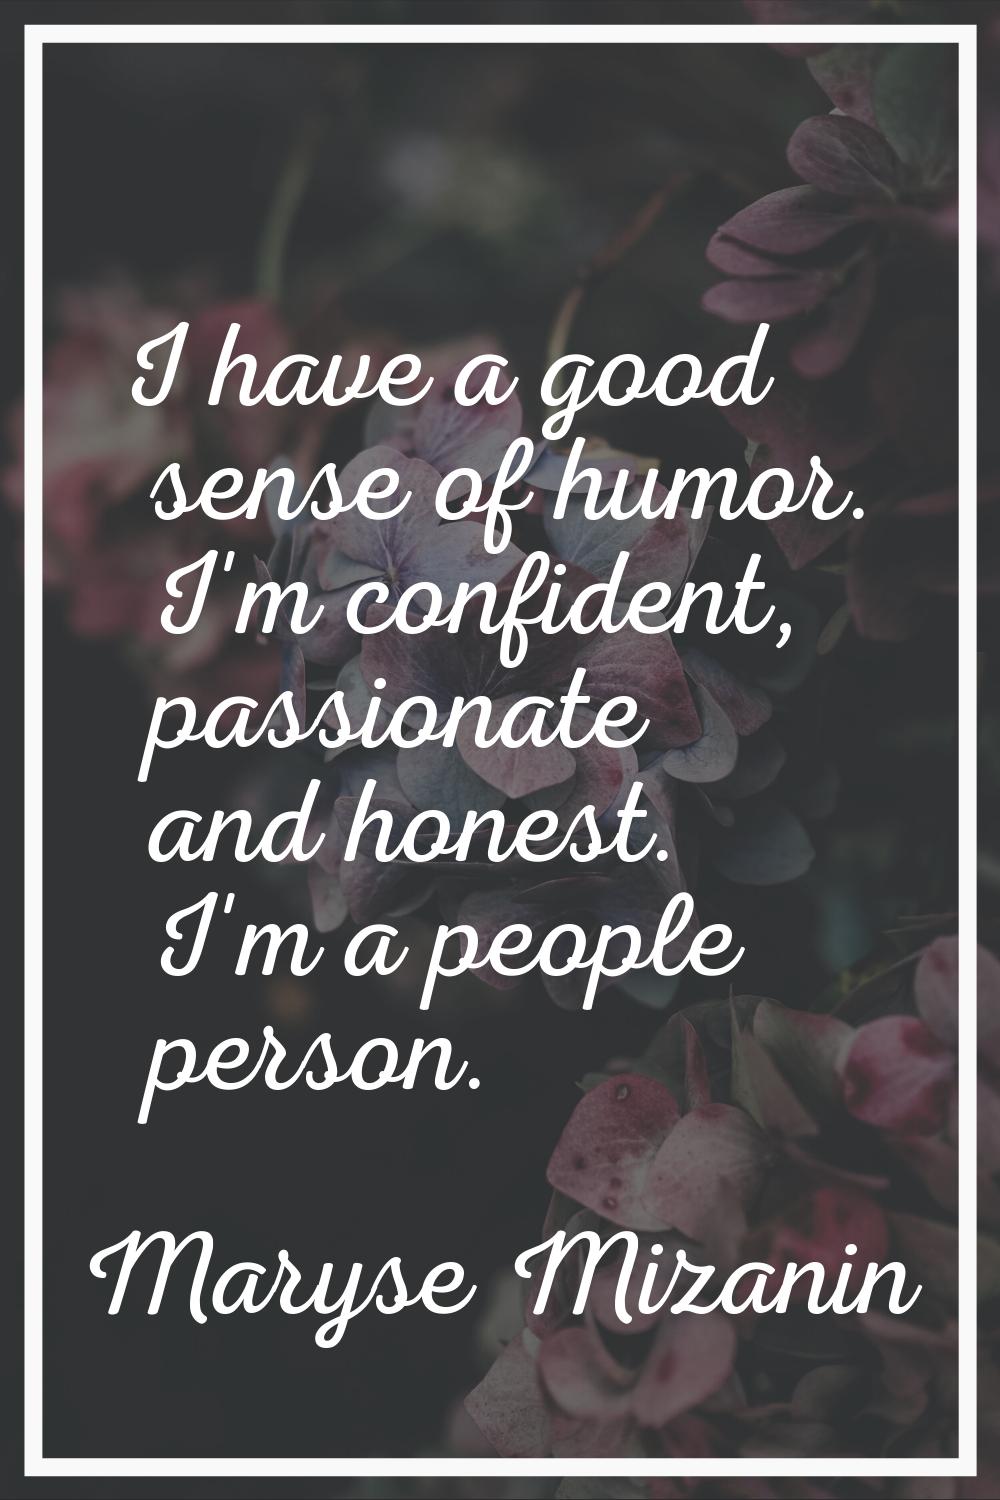 I have a good sense of humor. I'm confident, passionate and honest. I'm a people person.